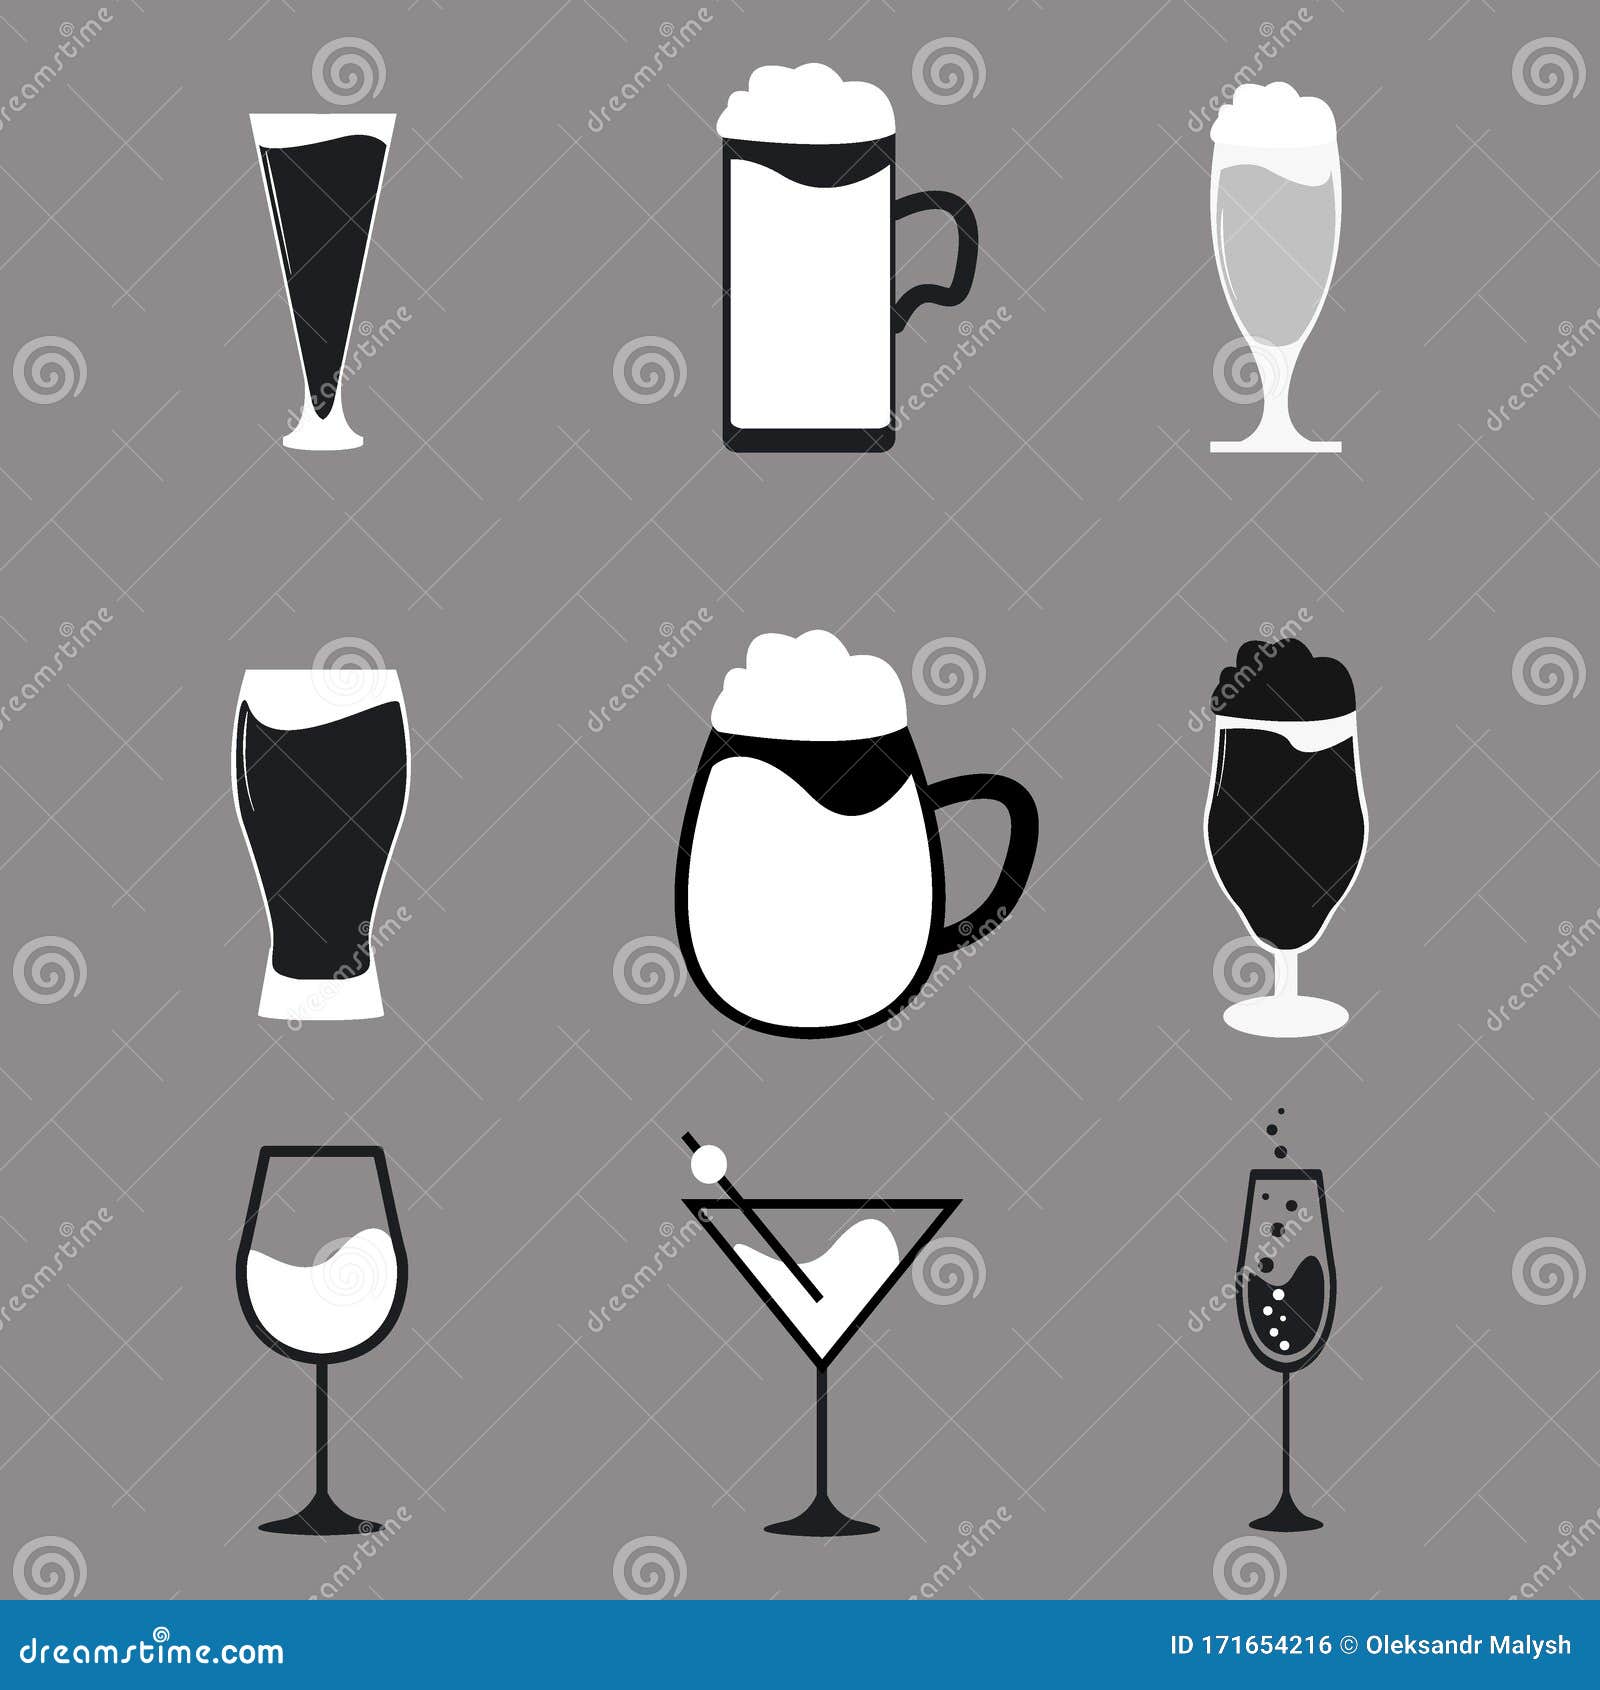 https://thumbs.dreamstime.com/z/different-types-beer-wine-cocktail-glasses-set-drink-icon-variations-different-types-beer-wine-cocktail-glasses-171654216.jpg